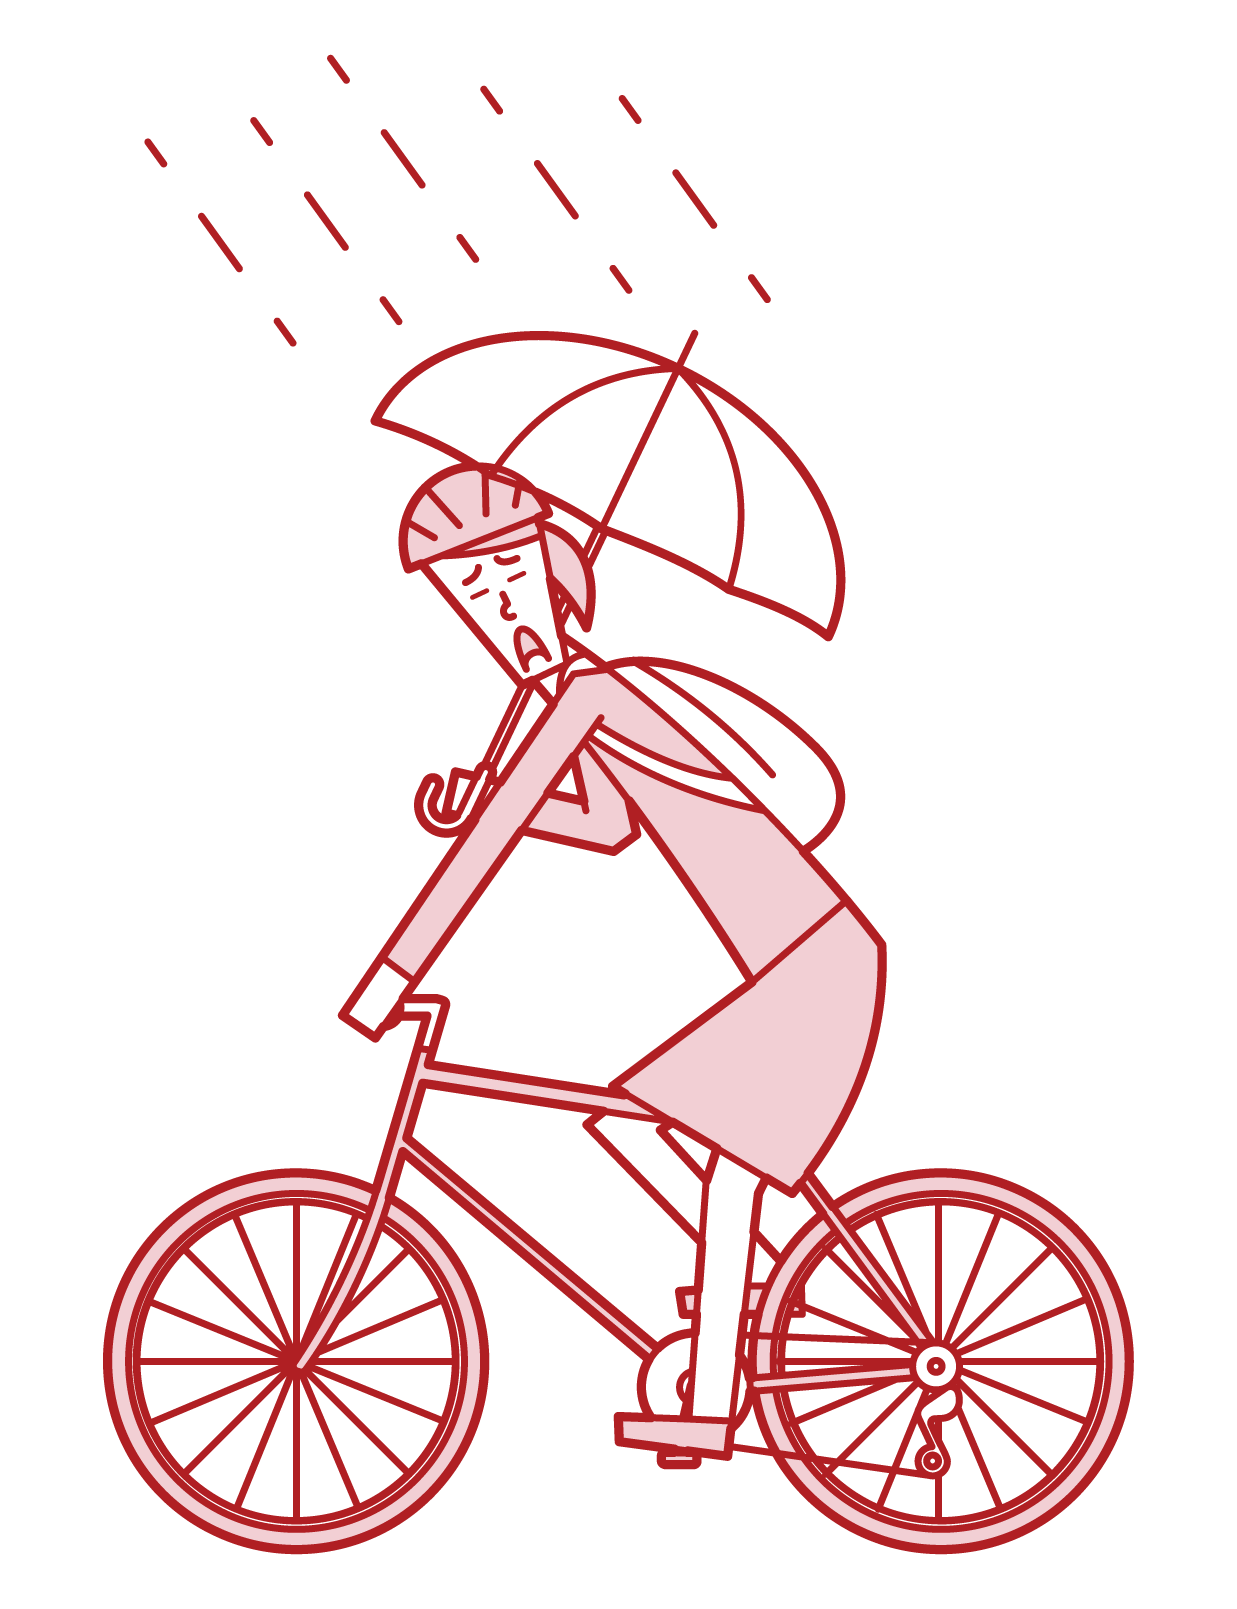 Illustration of a woman driving a bicycle while holding an umbrella